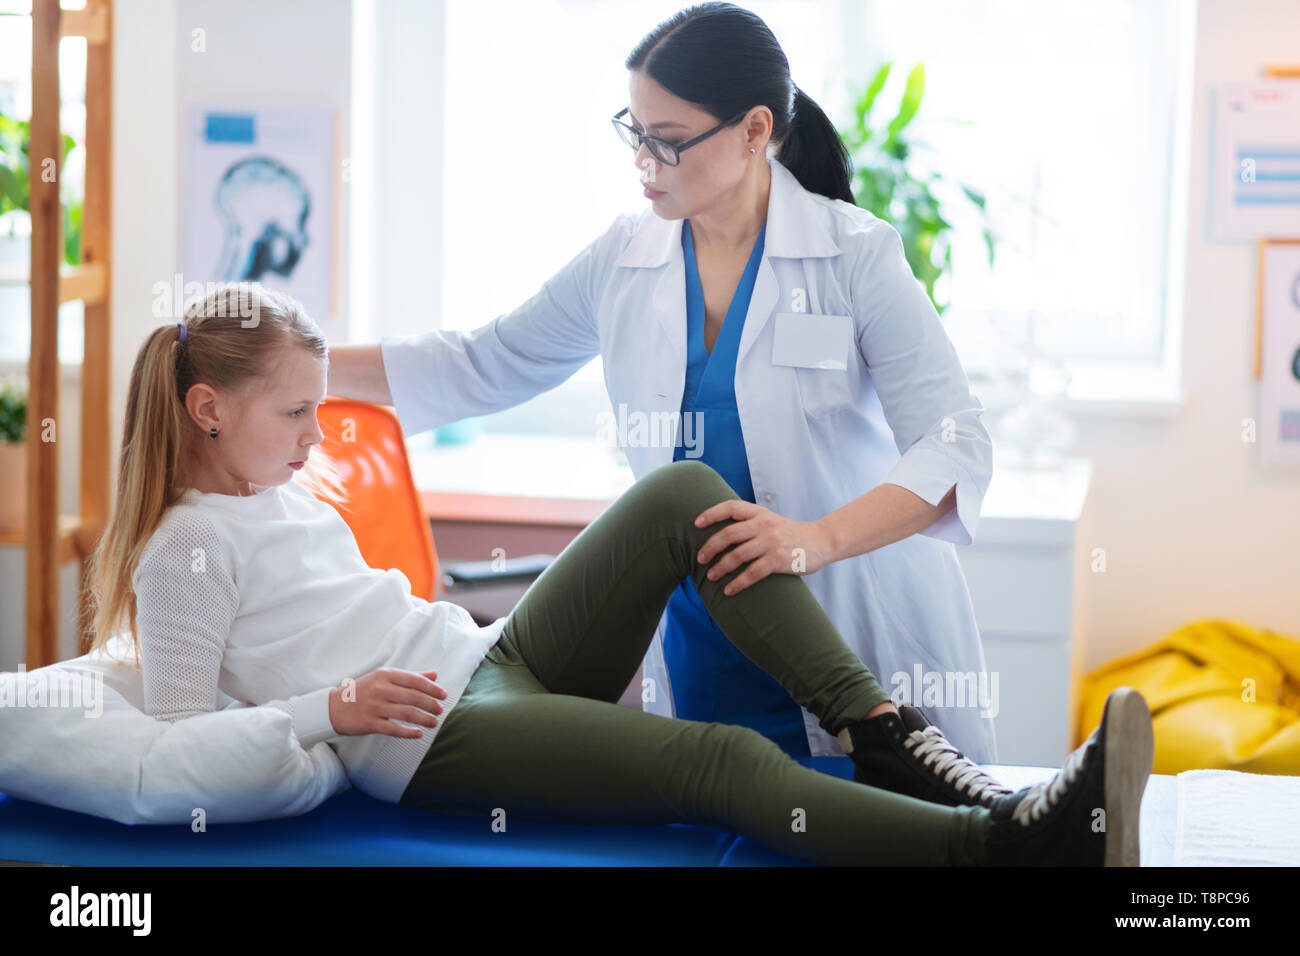 Blonde kid lying on a daybed while doctor observing her hurting leg Stock Photo